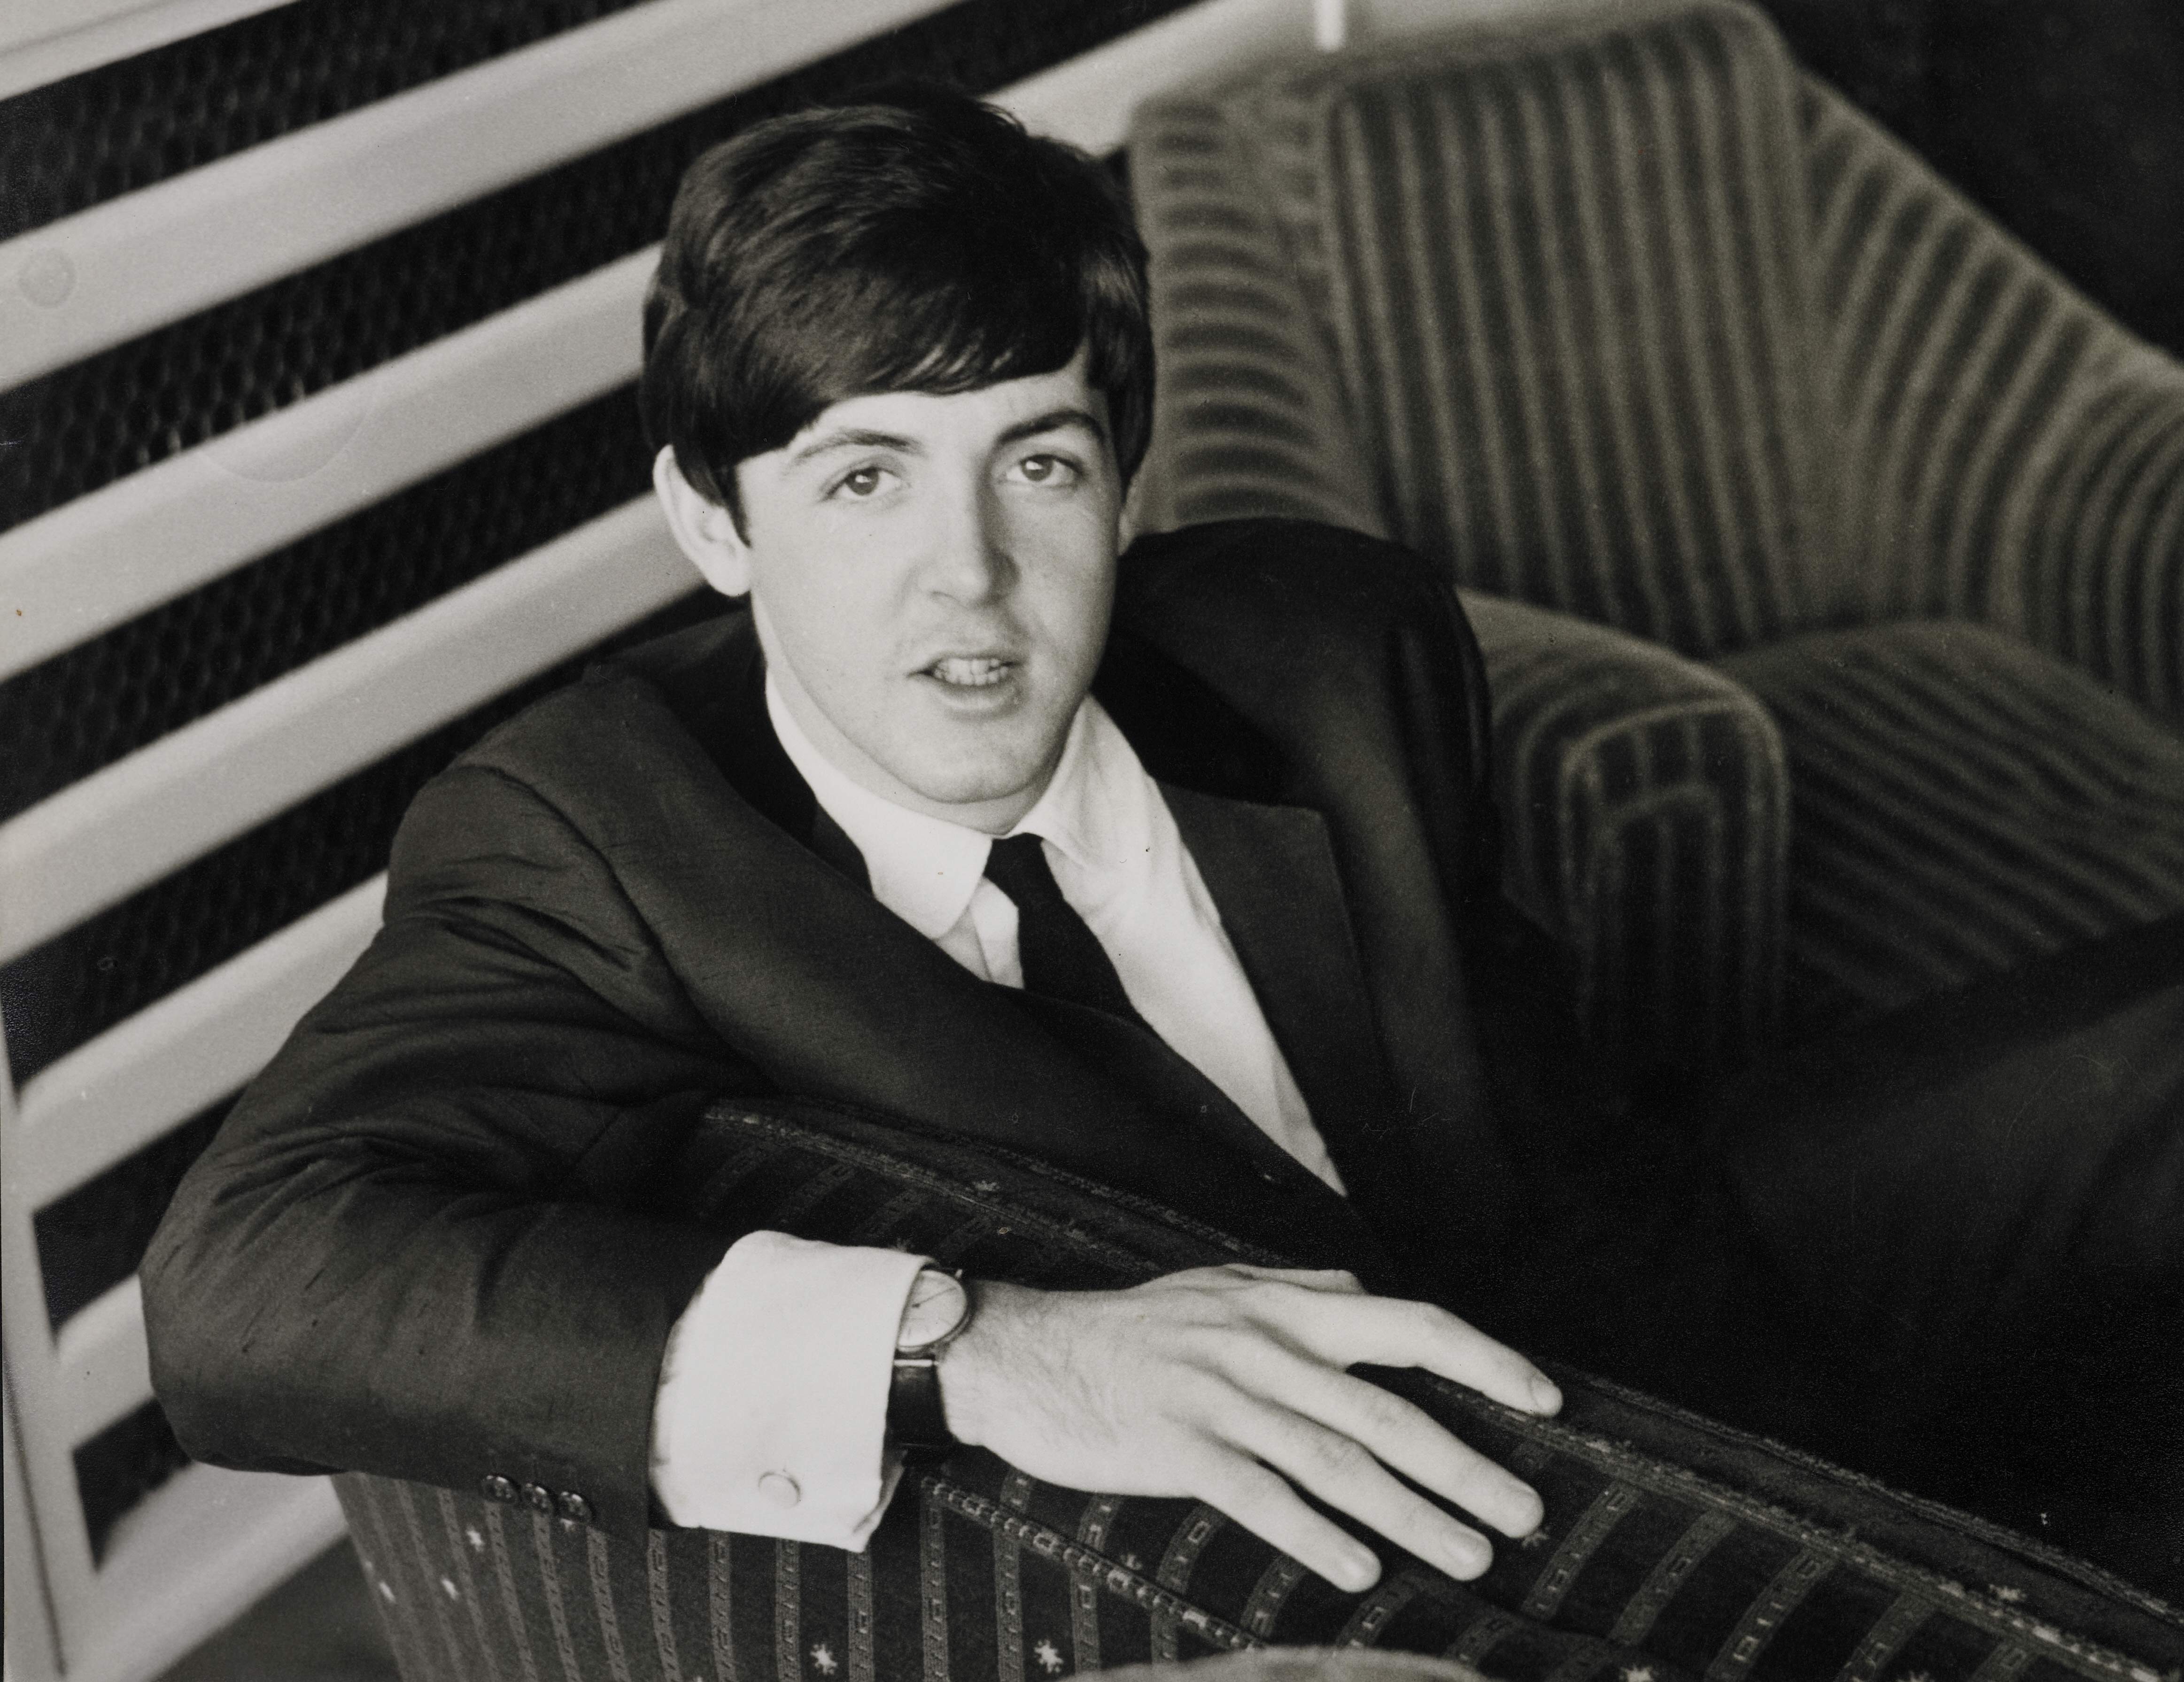 Paul McCartney in a chair during The Beatles' "Hey Jude" era